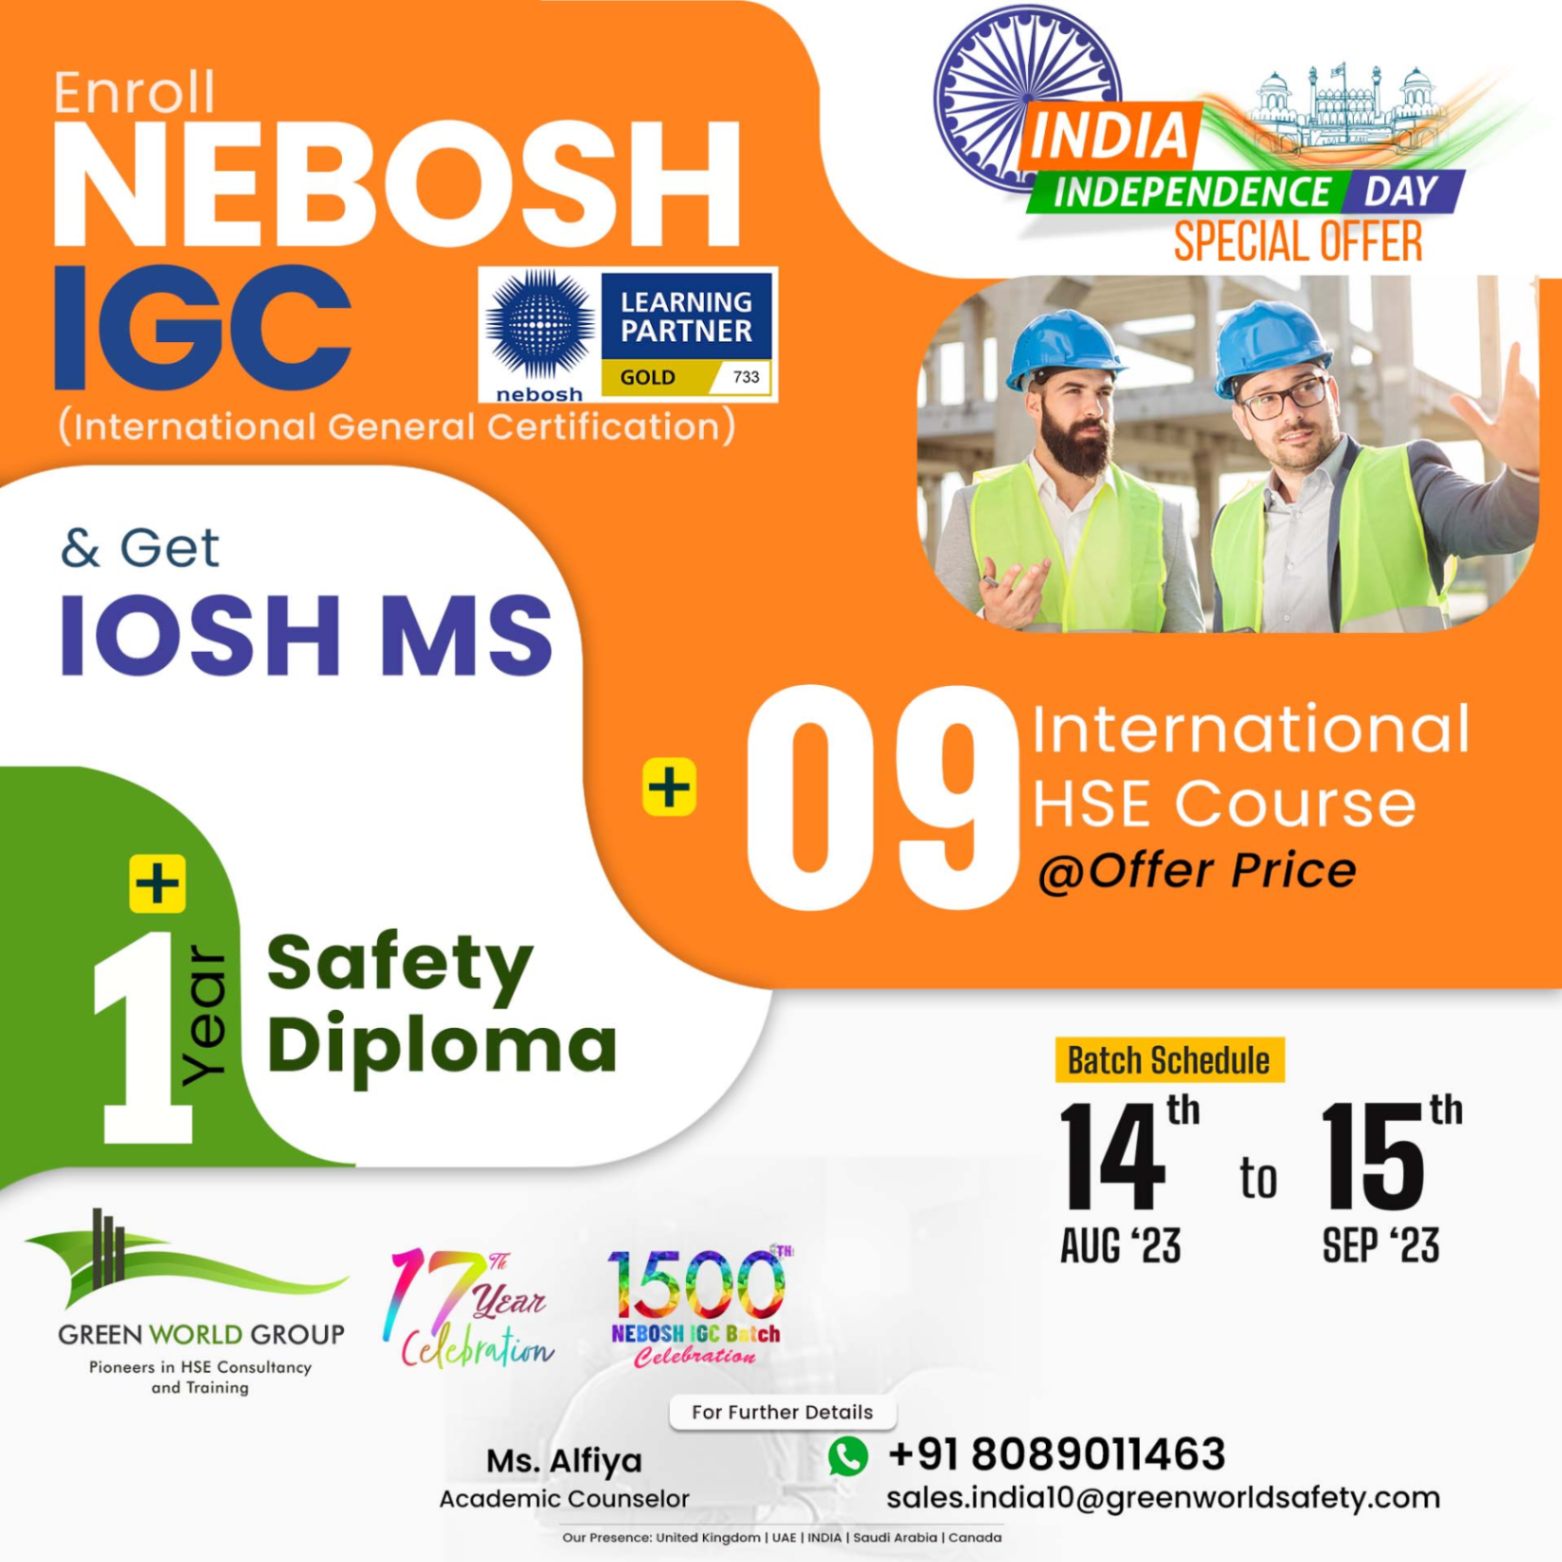 Independence day Special Offers On NEBOSH IGC  Course in Kerala 